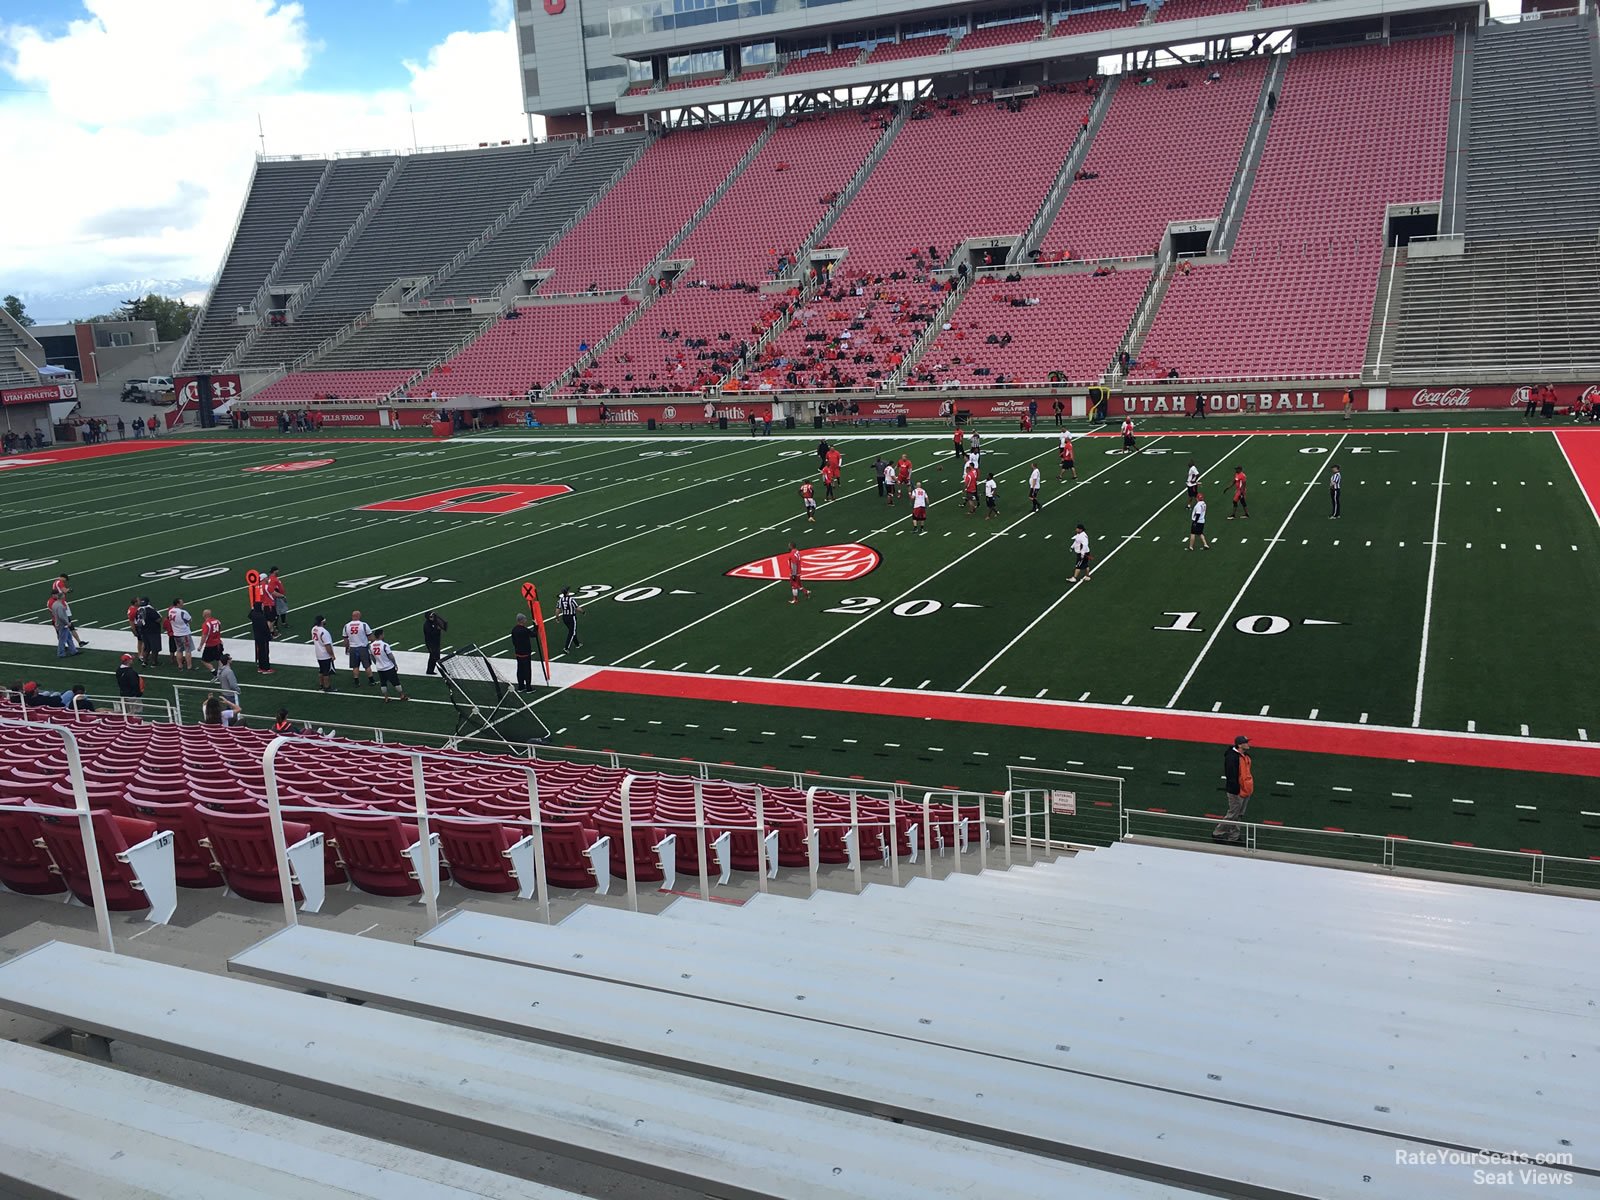 section e33, row 20 seat view  - rice-eccles stadium